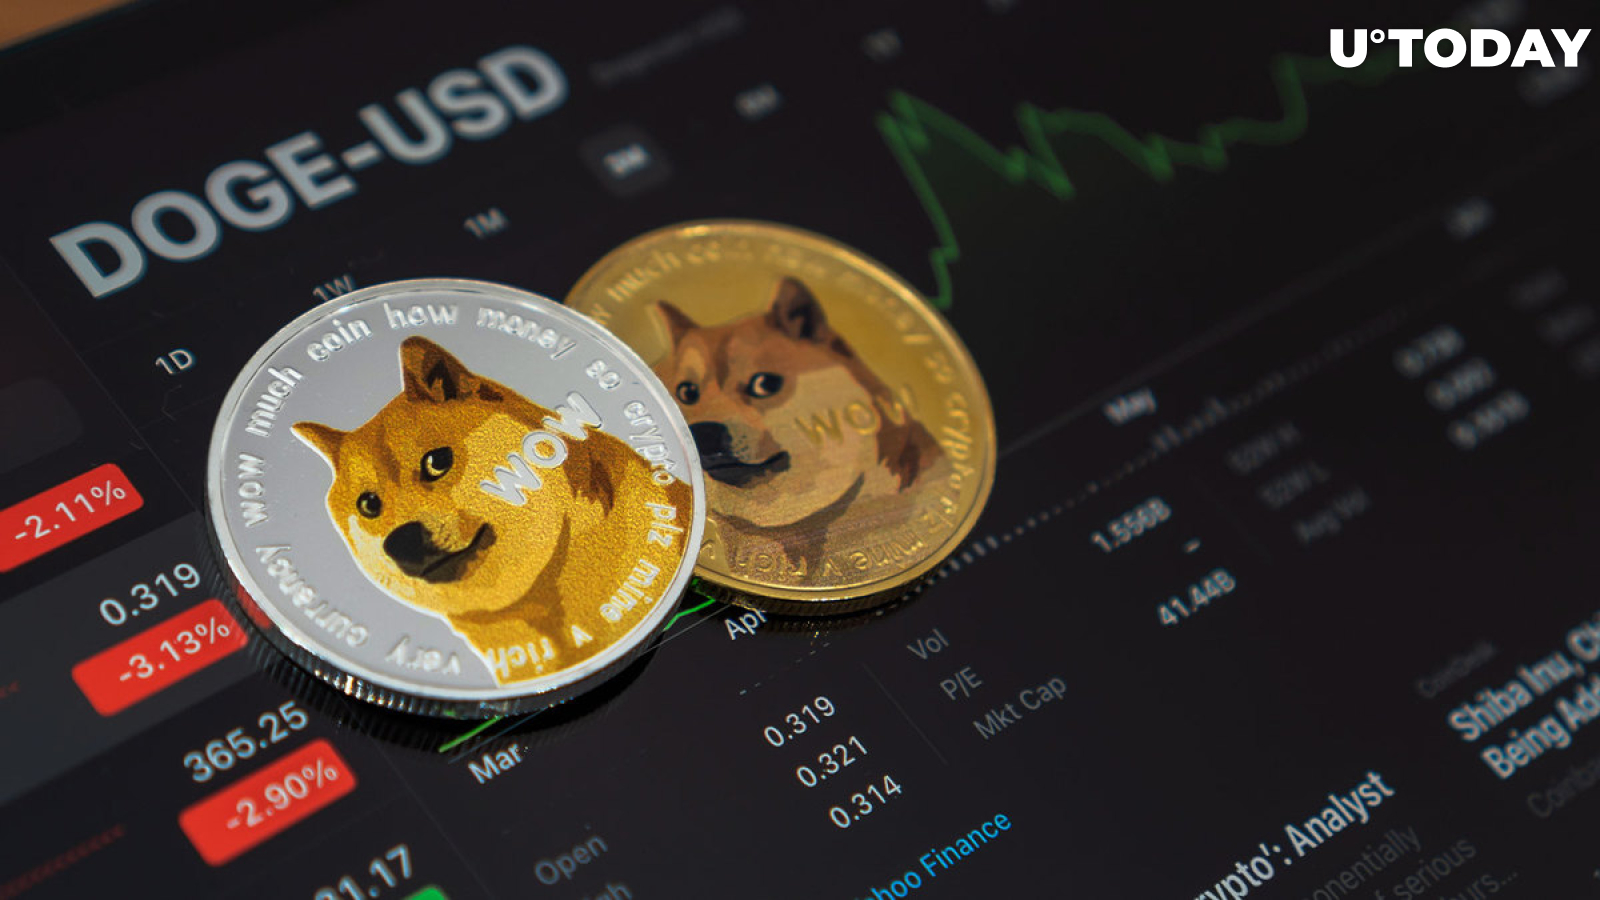 Twitter’s Halted Dogecoin interest resulted in 10% price drop